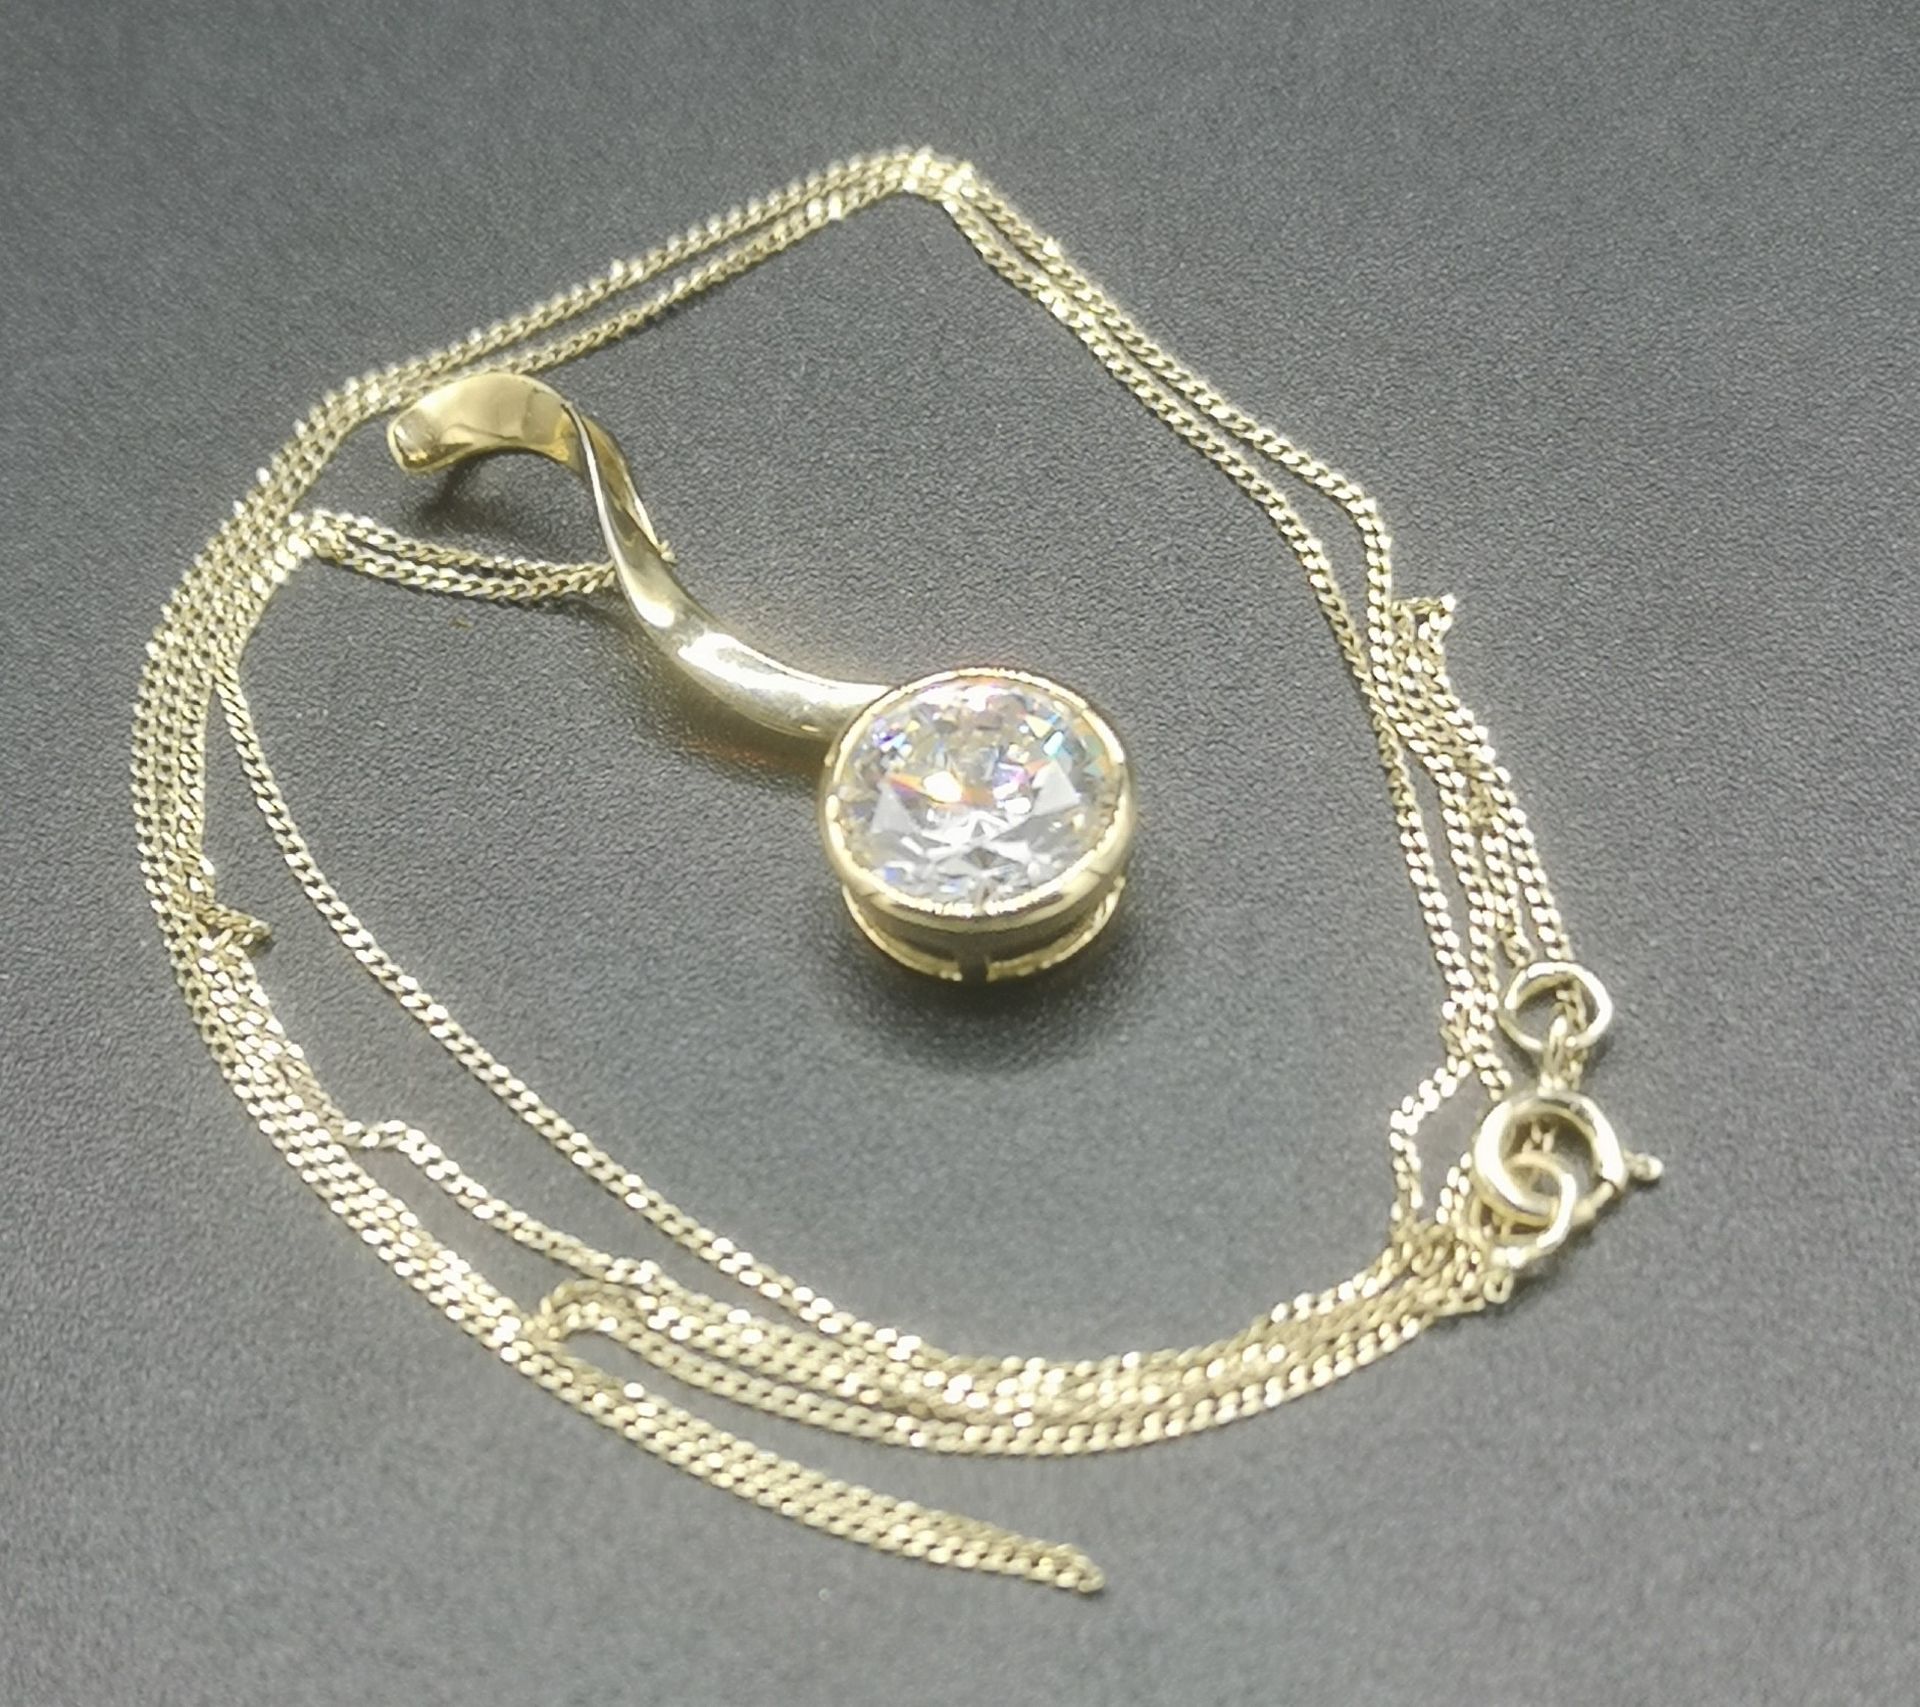 9ct gold necklace with 14ct gold pendant - Image 3 of 4